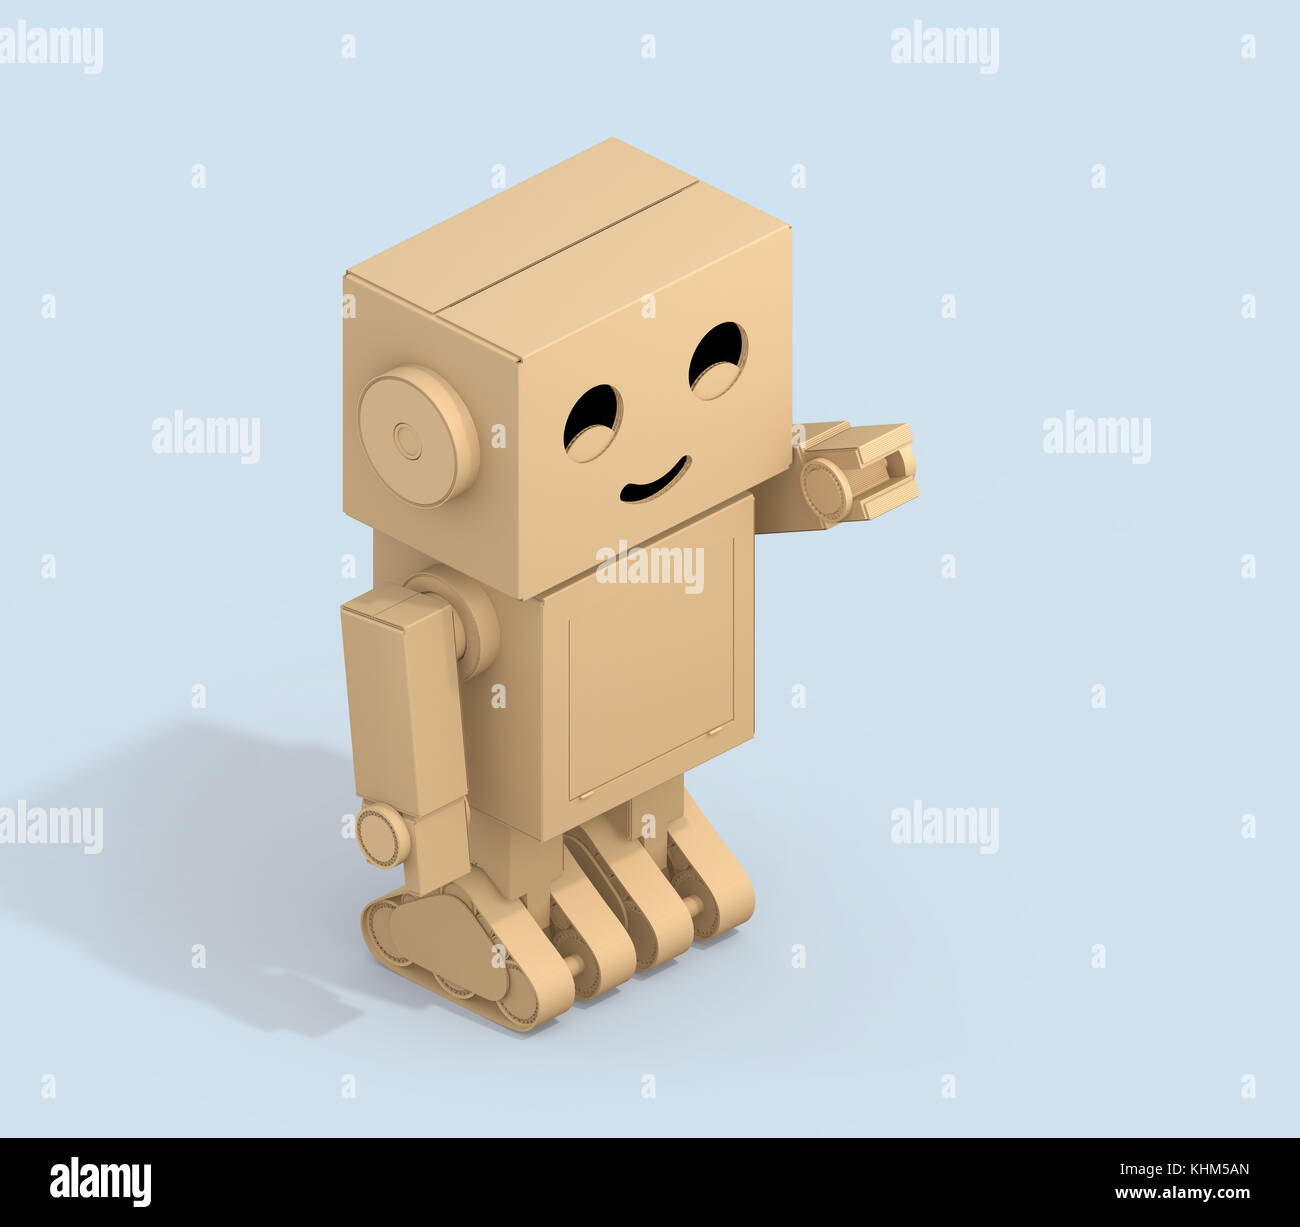 Cute Cardboard Robot isolated on light blue background. 3D rendering image  Stock Photo - Alamy